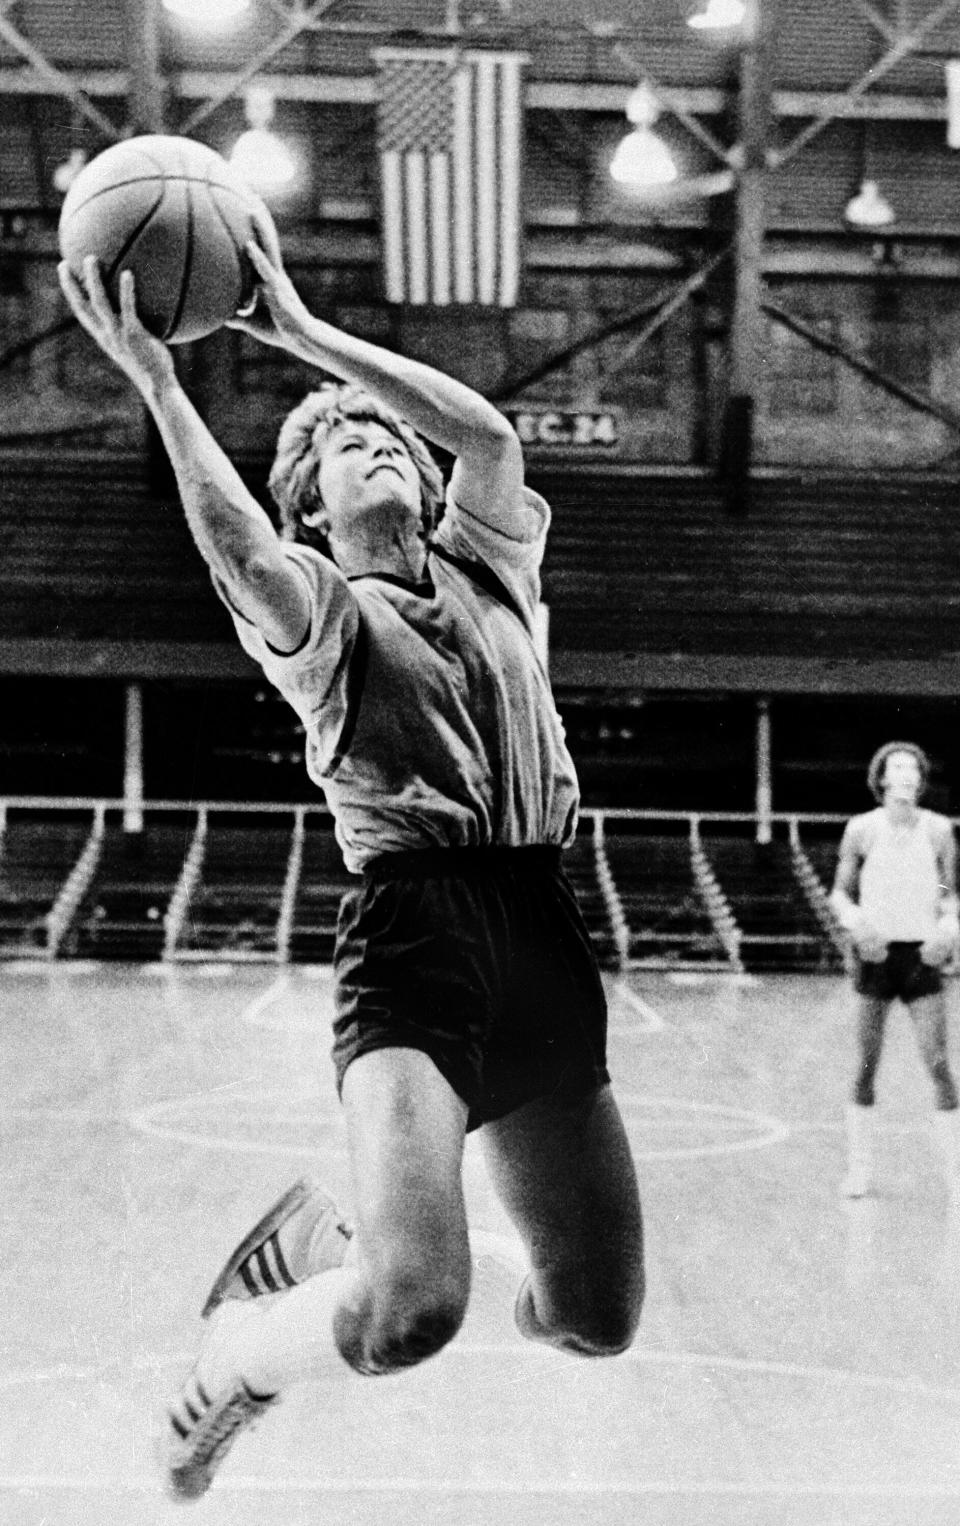 FILE - Ann Meyers drives during practice at the NBA rookie camp for the Indiana Pacers in Indianapolis, Sept. 10, 1978. (AP Photo/File)